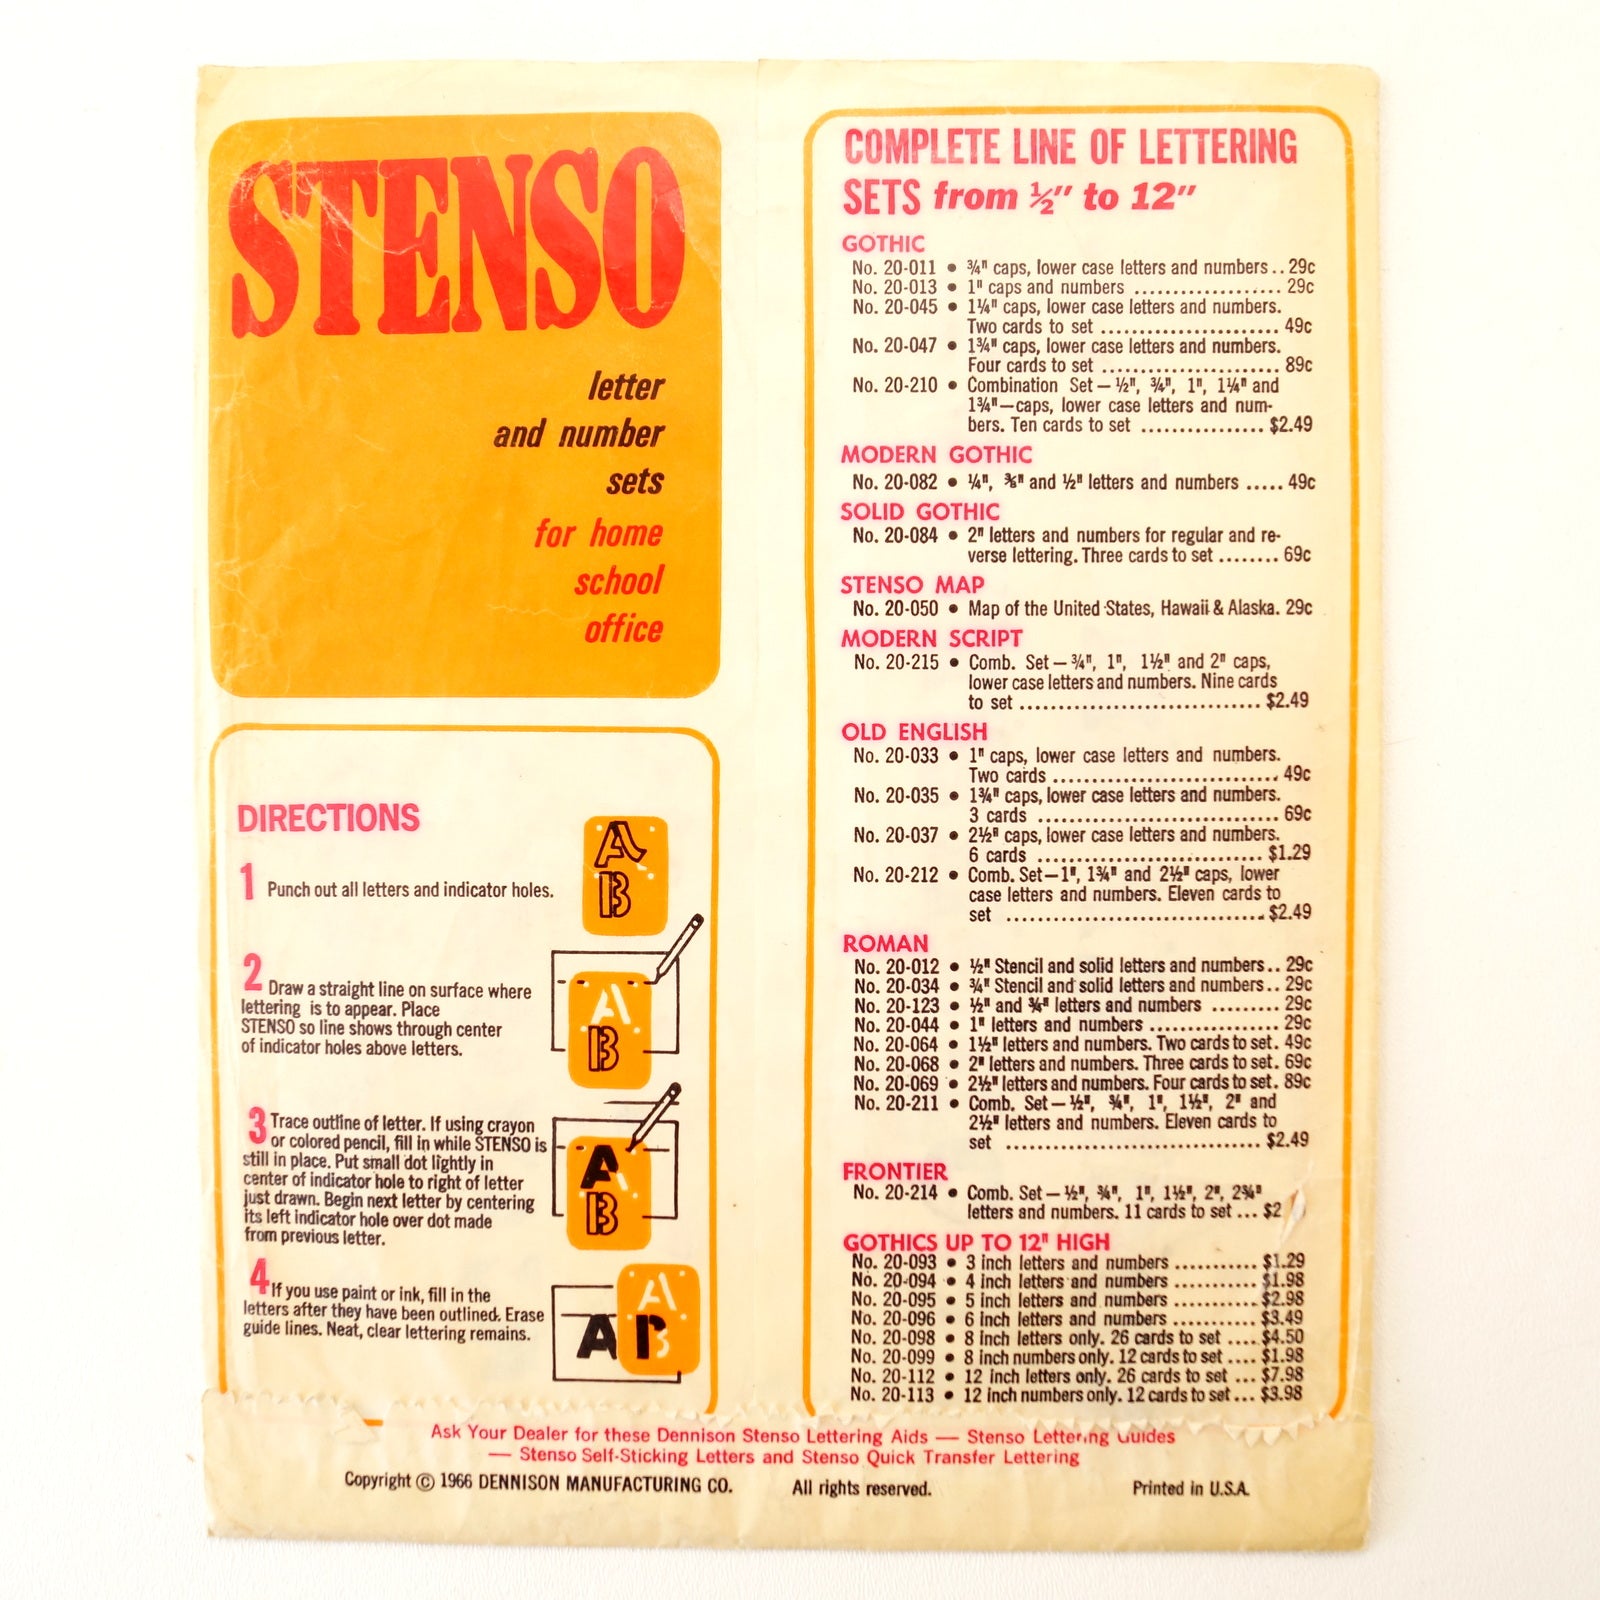 Vintage STENSO Stencil Lettering Guide, Roman 1/2 Letters Numbers (c. –